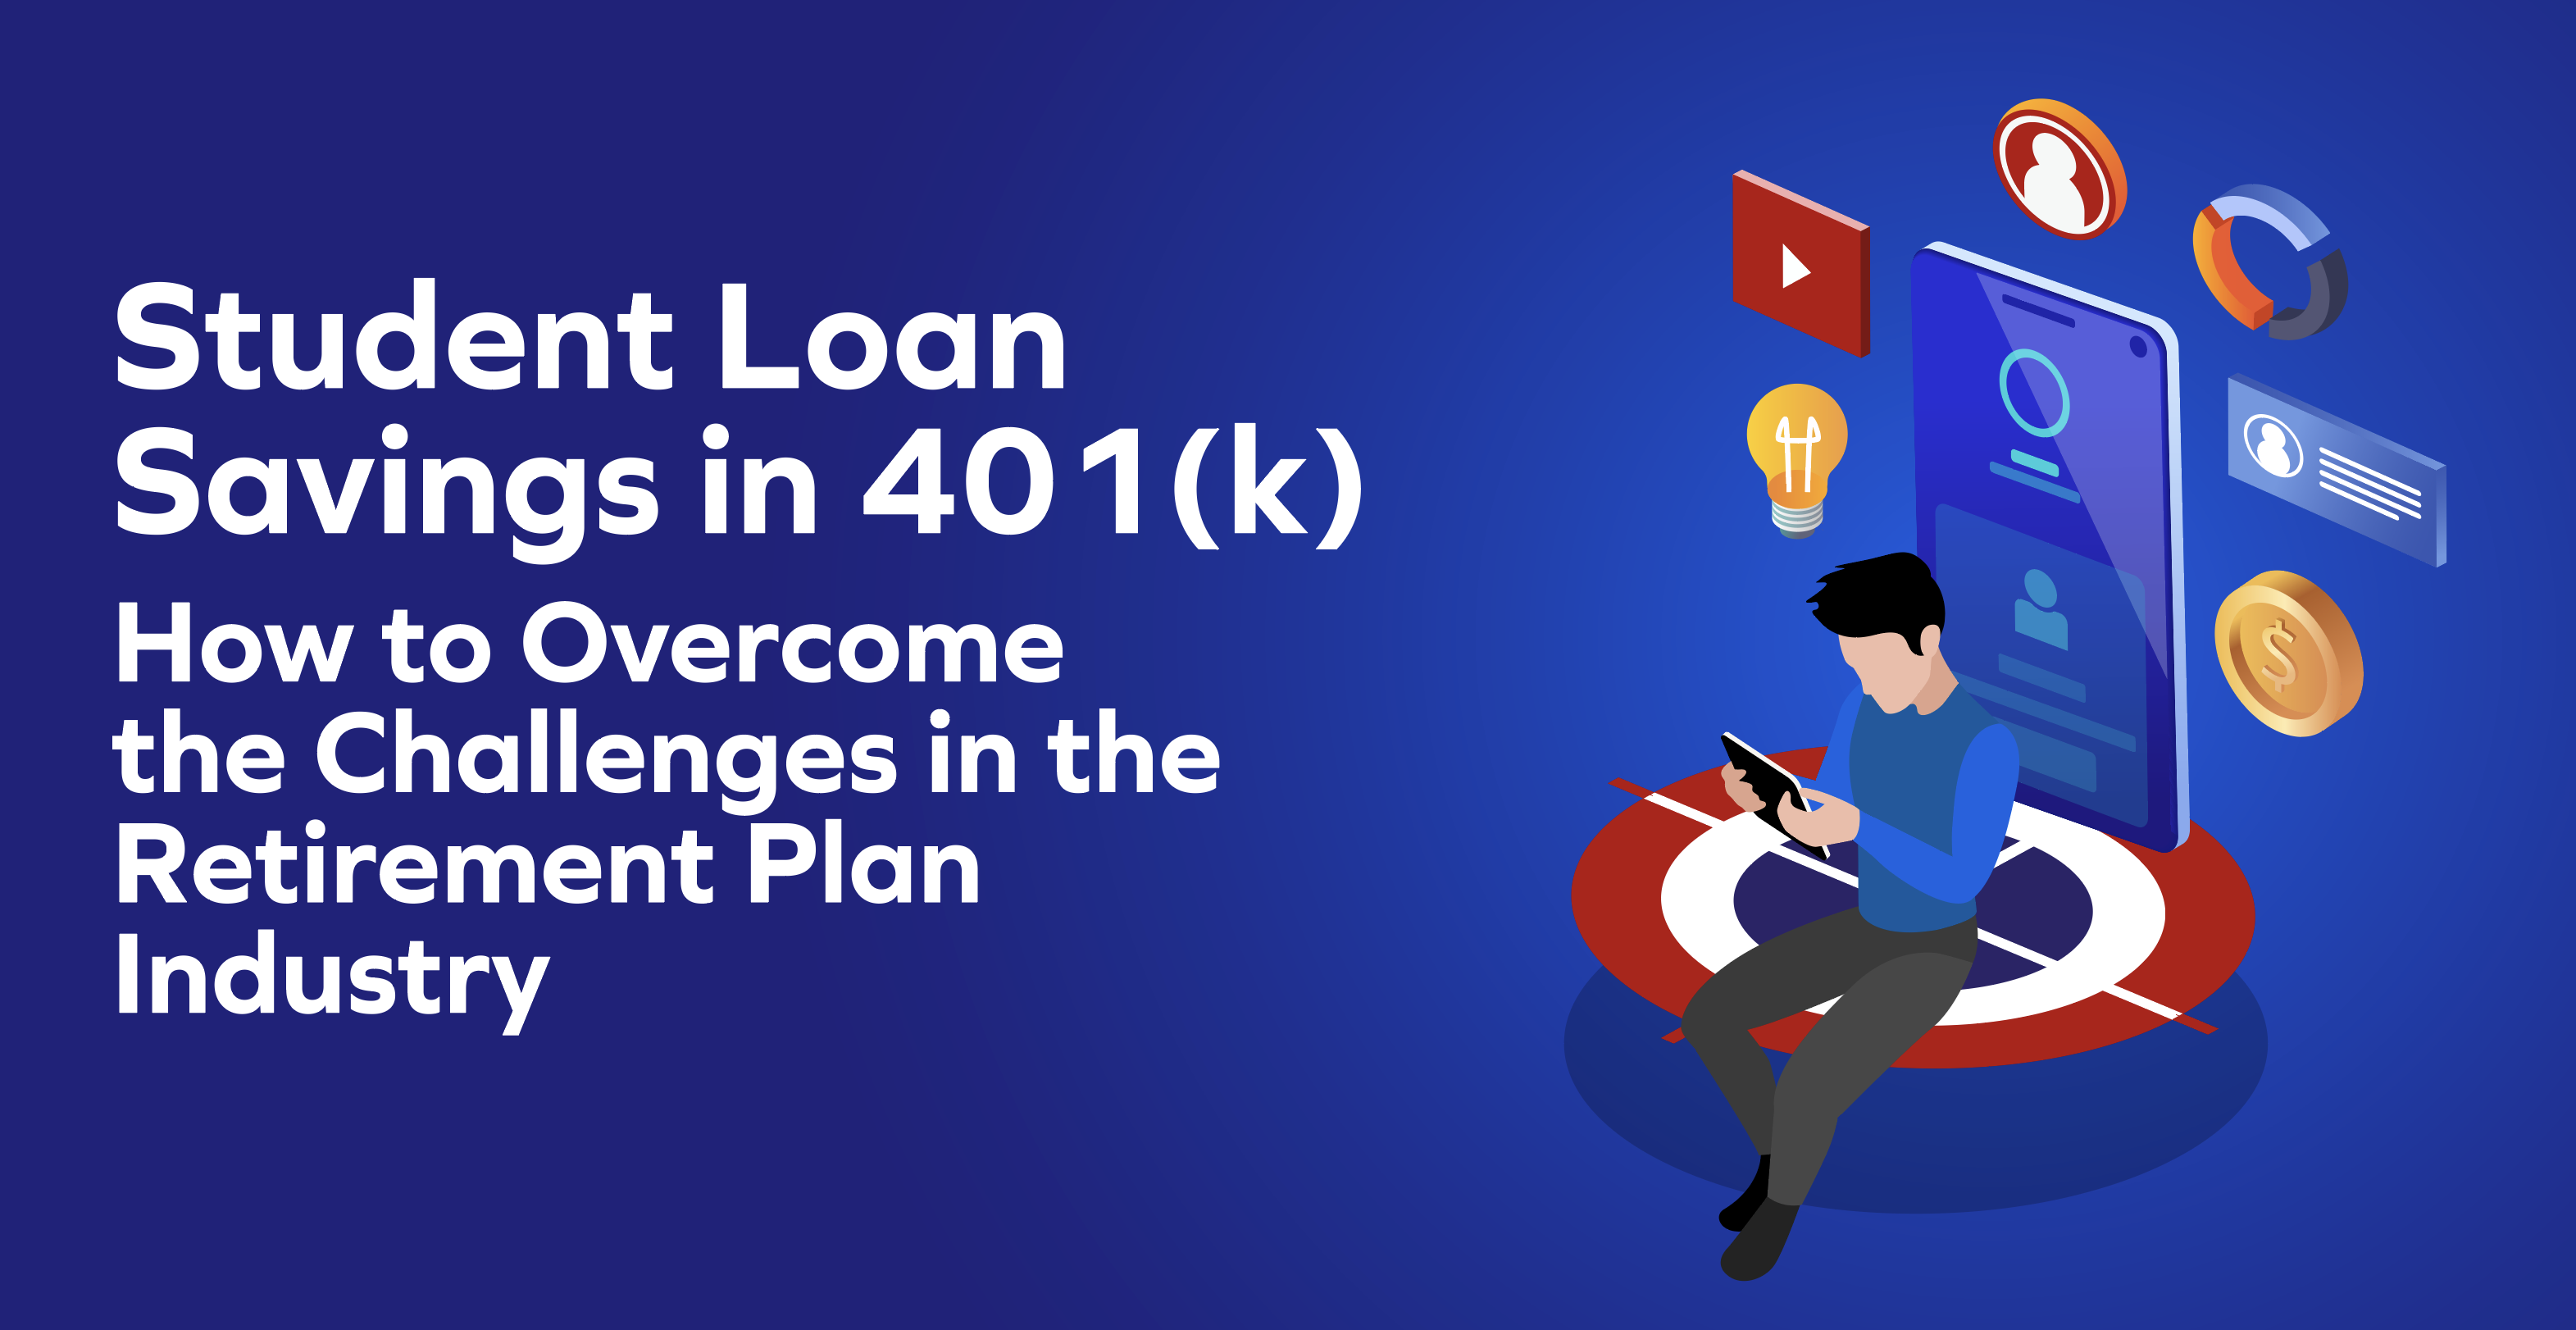 Student Loan Savings in 401(k): Challenges for the Retirement Plan Industry and How to Overcome Them?